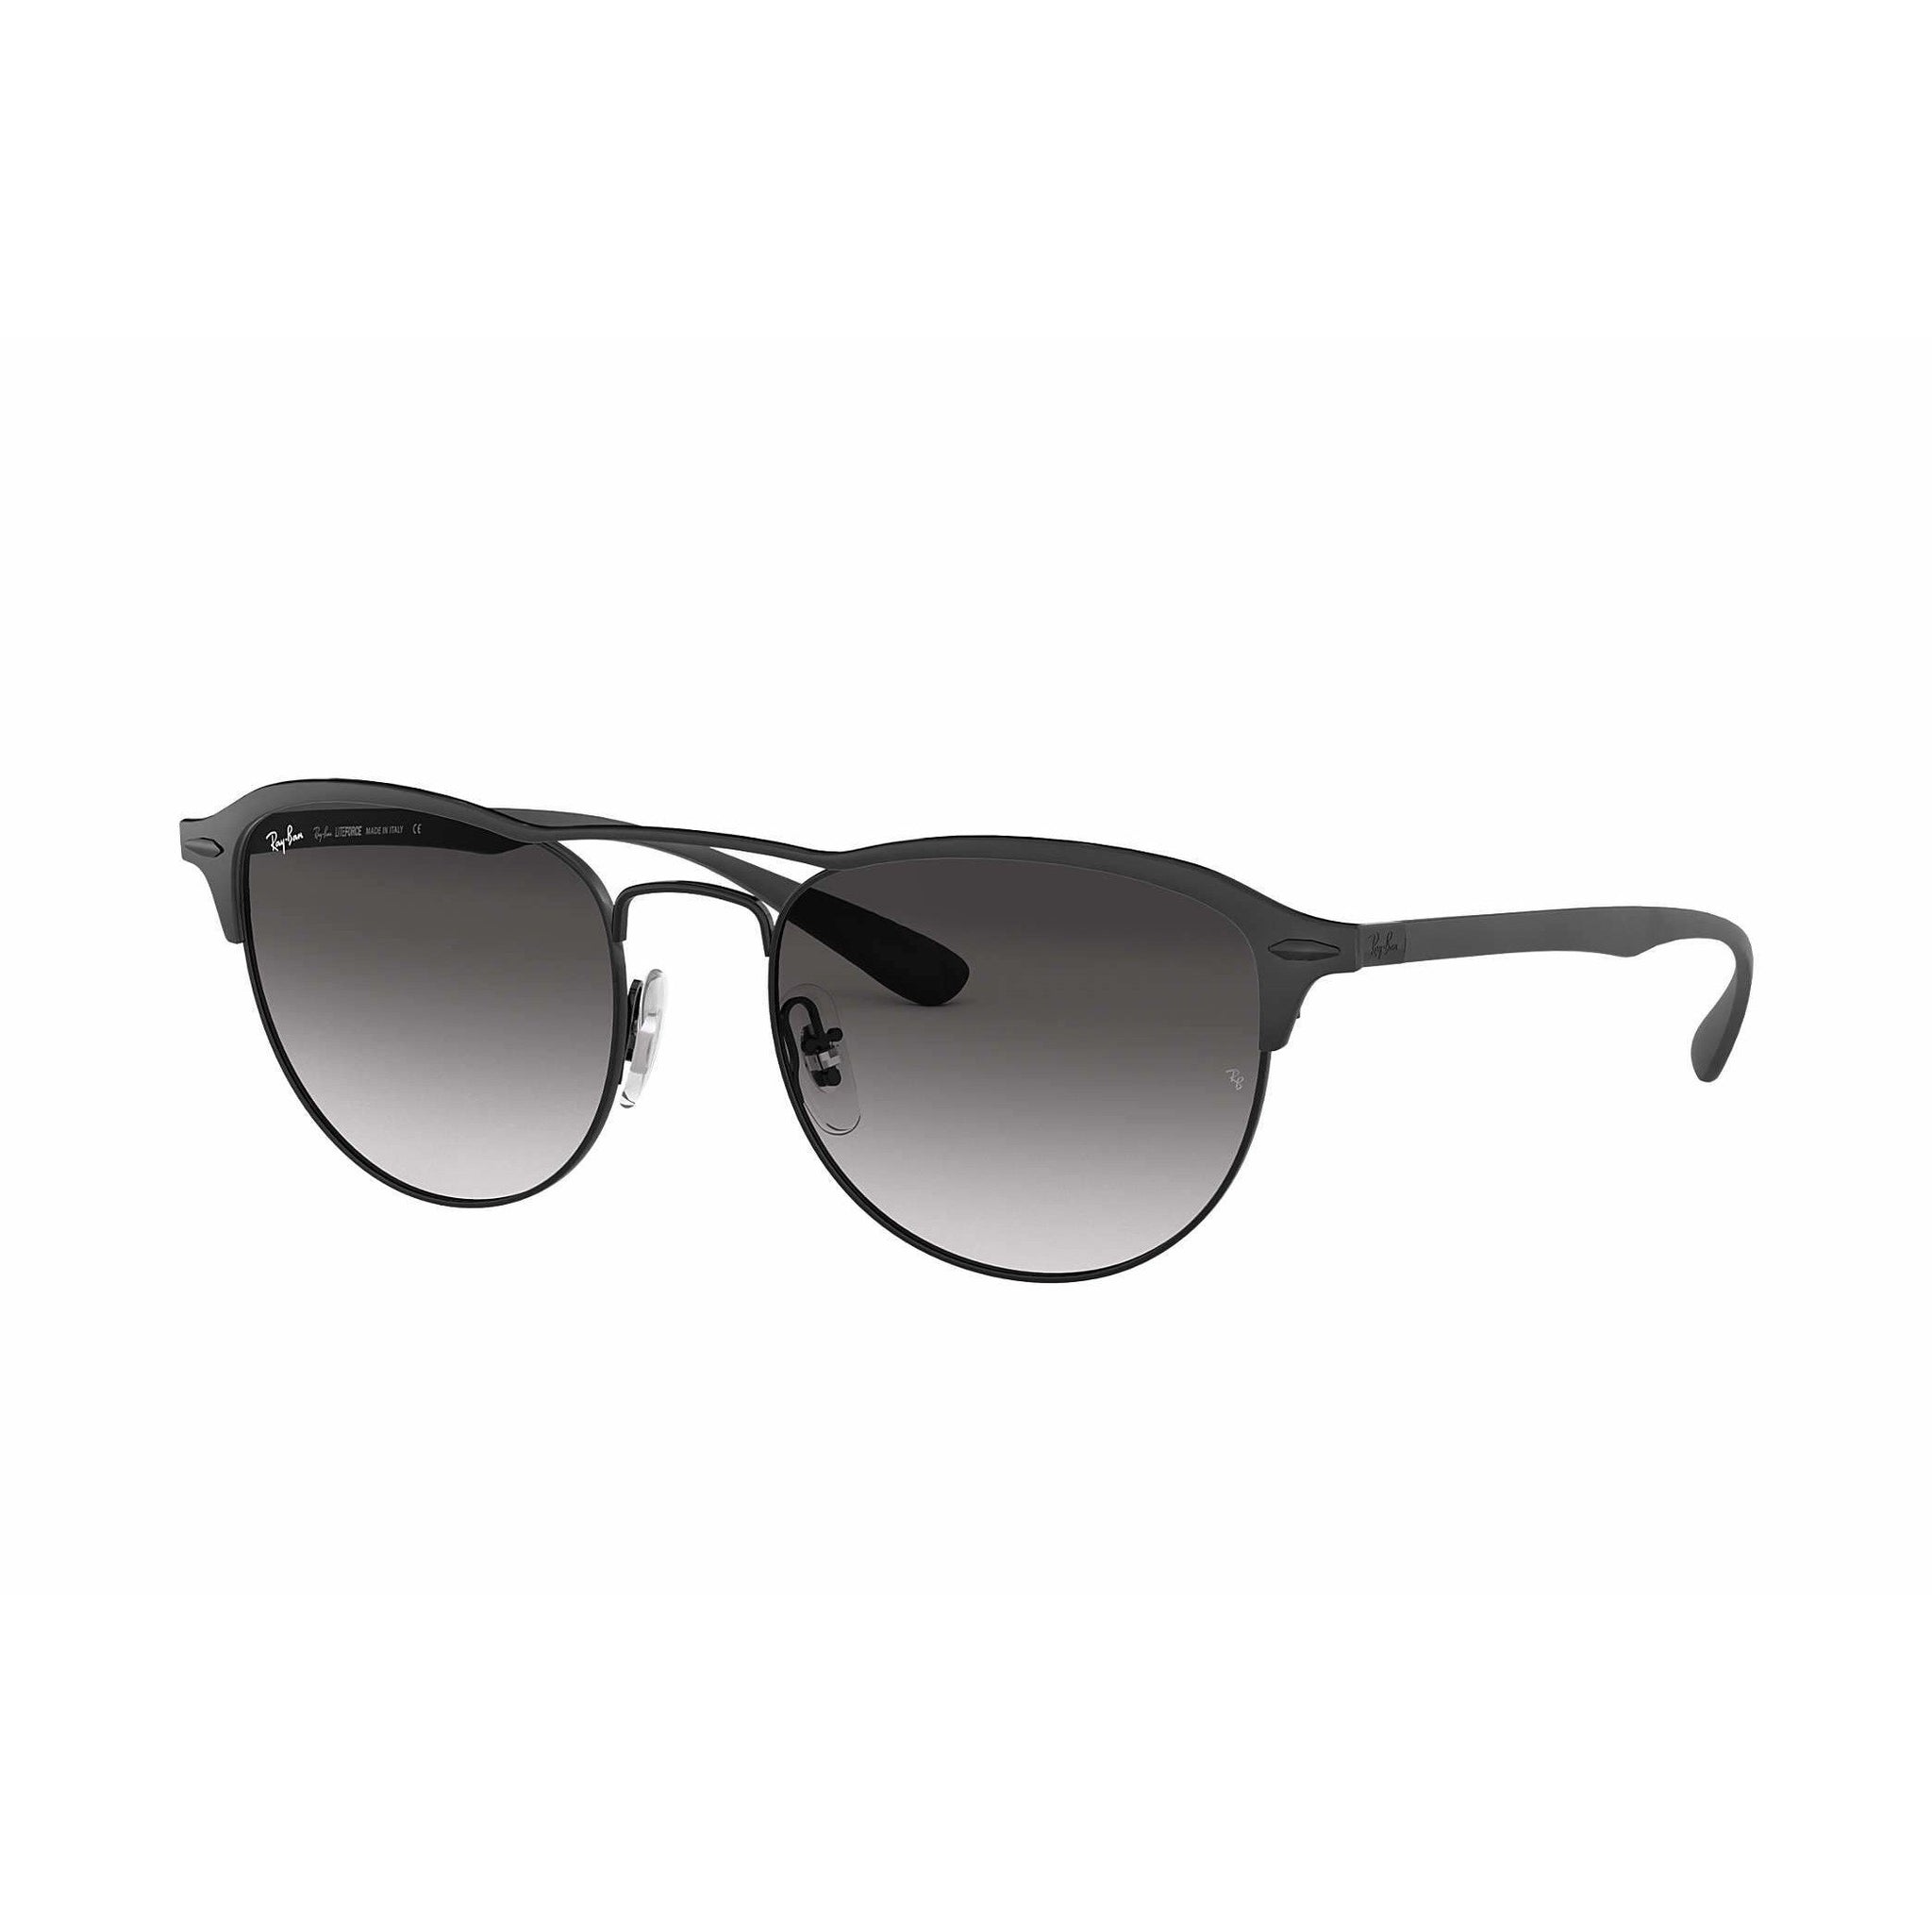 [RB3596-186/8G] Mens Ray-Ban Oval Sunglasses